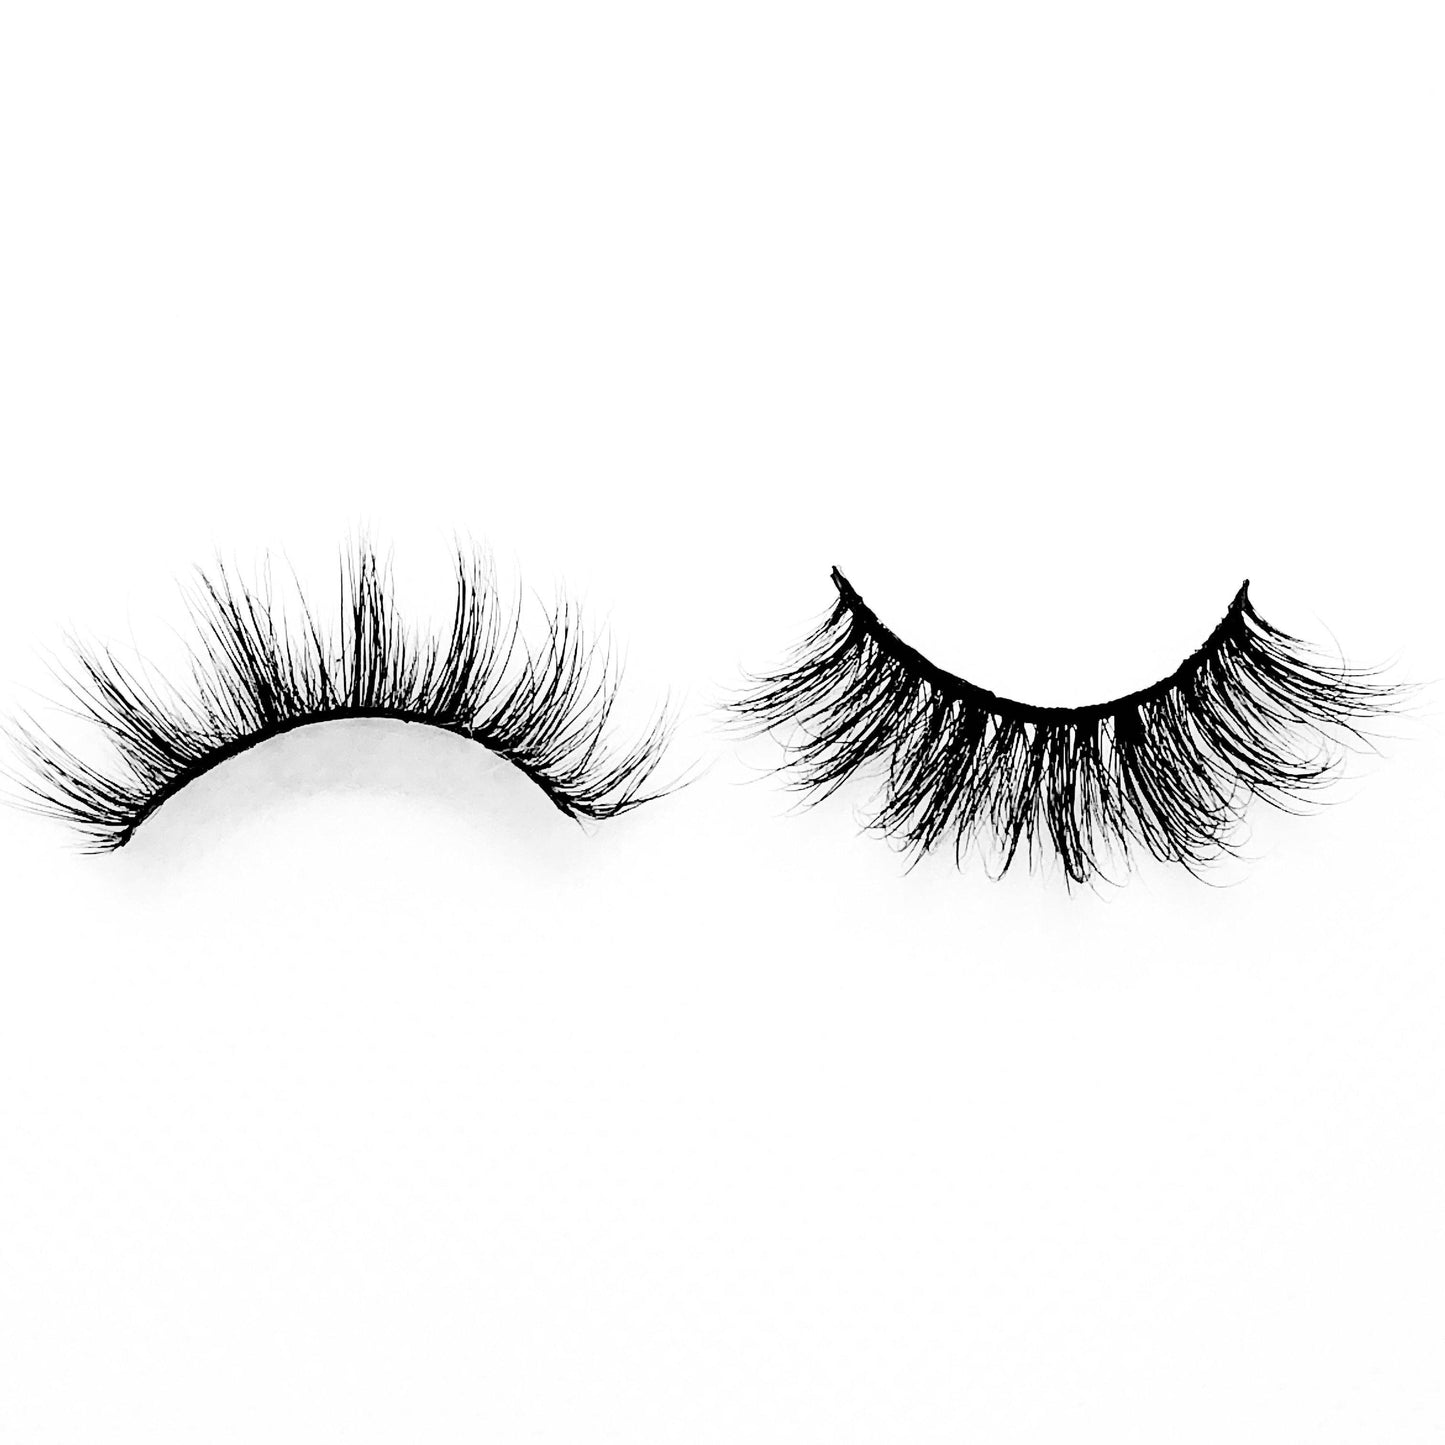 London-Medium Volume-Fun, flirty, and casual 3D Mink lashes. “London” is a super cute, wispy, natural pair of lashes! They’re essential for your everyday lash collection. The alternating lengths are perfect for giving you a doll eyed look. The perfect style for a girl on the go with/without glam. Also available in our "Wispy (3-Pack)" and "Best Sellers (3-Pack)." Description Handmade, Cruelty-Free, Wear up to 30x Material: 100% Mink Band: Black Cotton Band Volume: Medium Style: Wispy, Flirty, Do